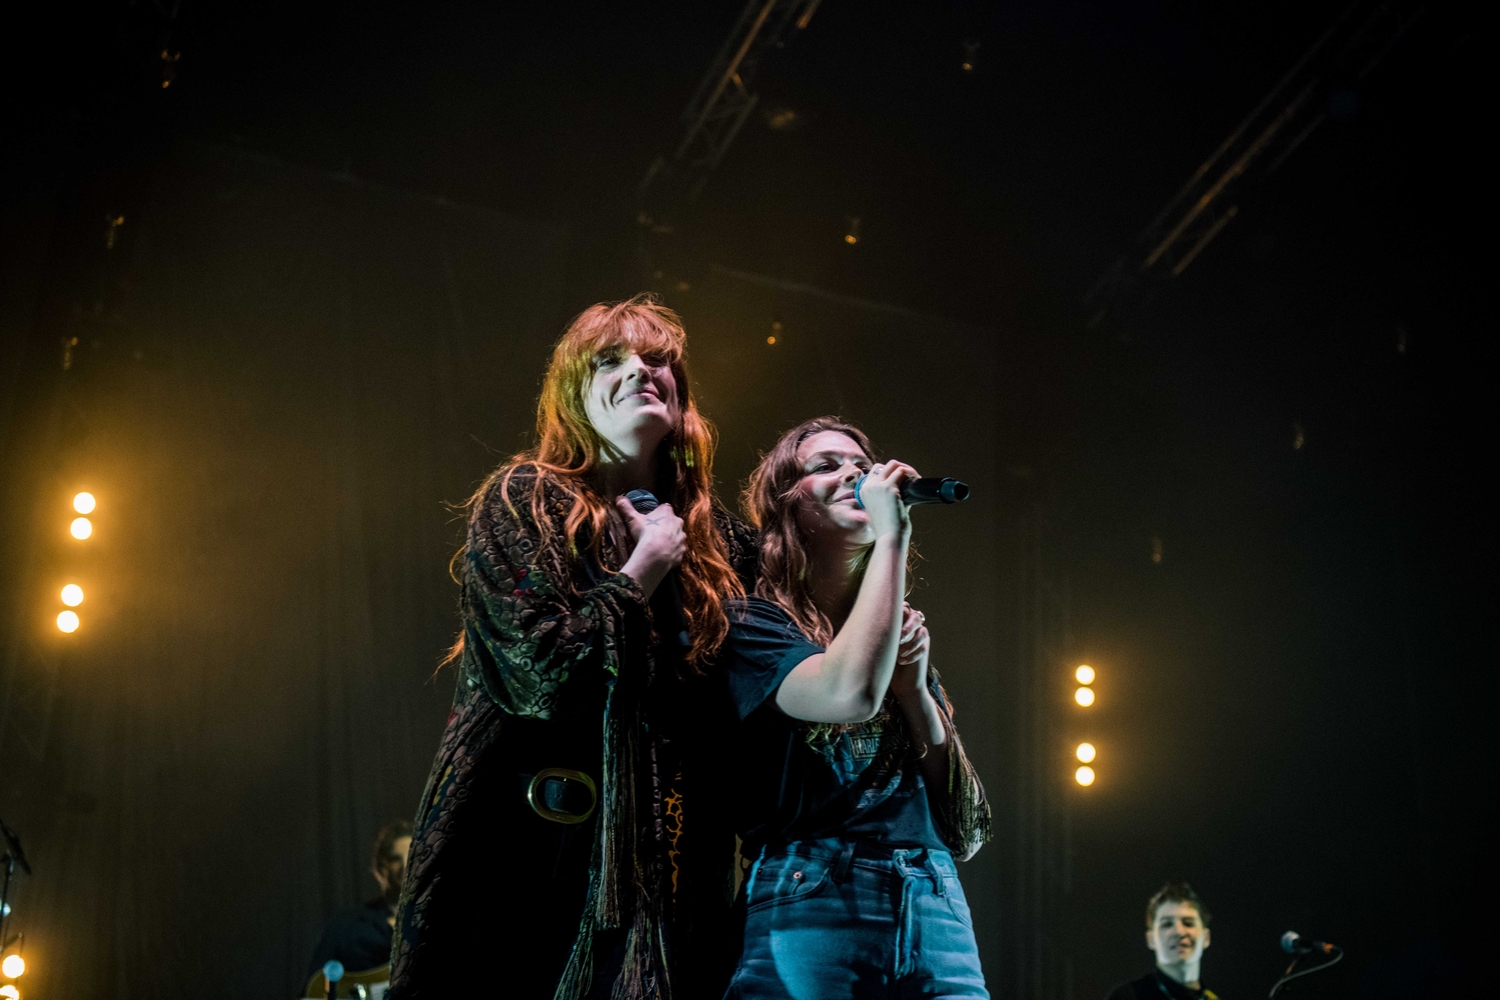 Watch Florence Welch join Maggie Rogers on stage at Brixton Academy